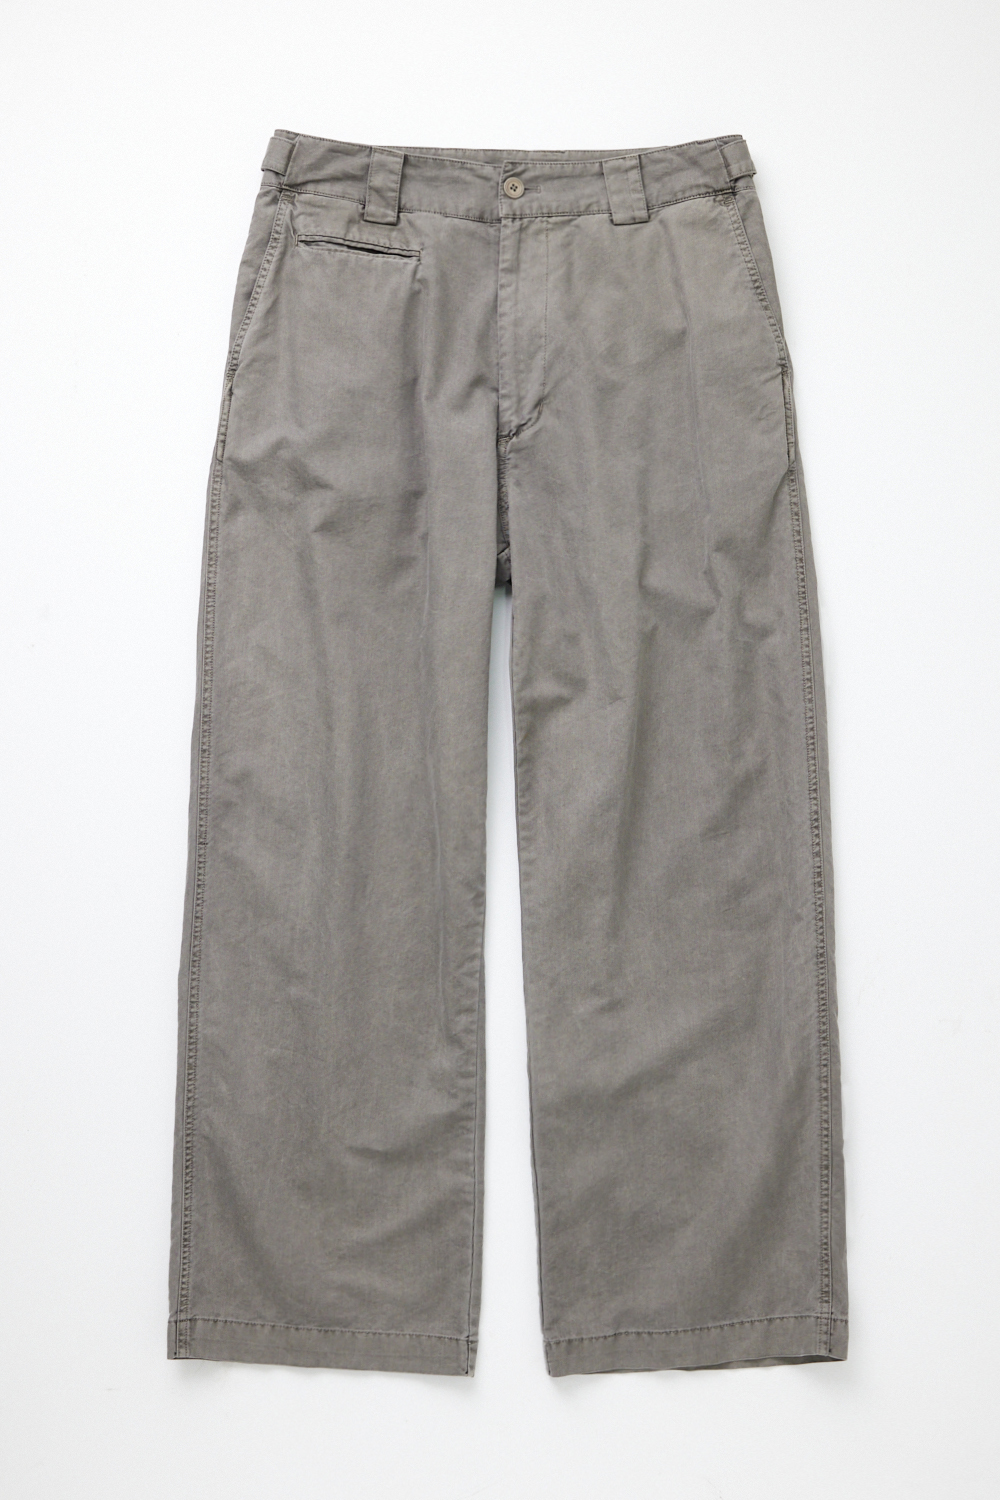 VTG Over Chino Pigment Dyed Grey